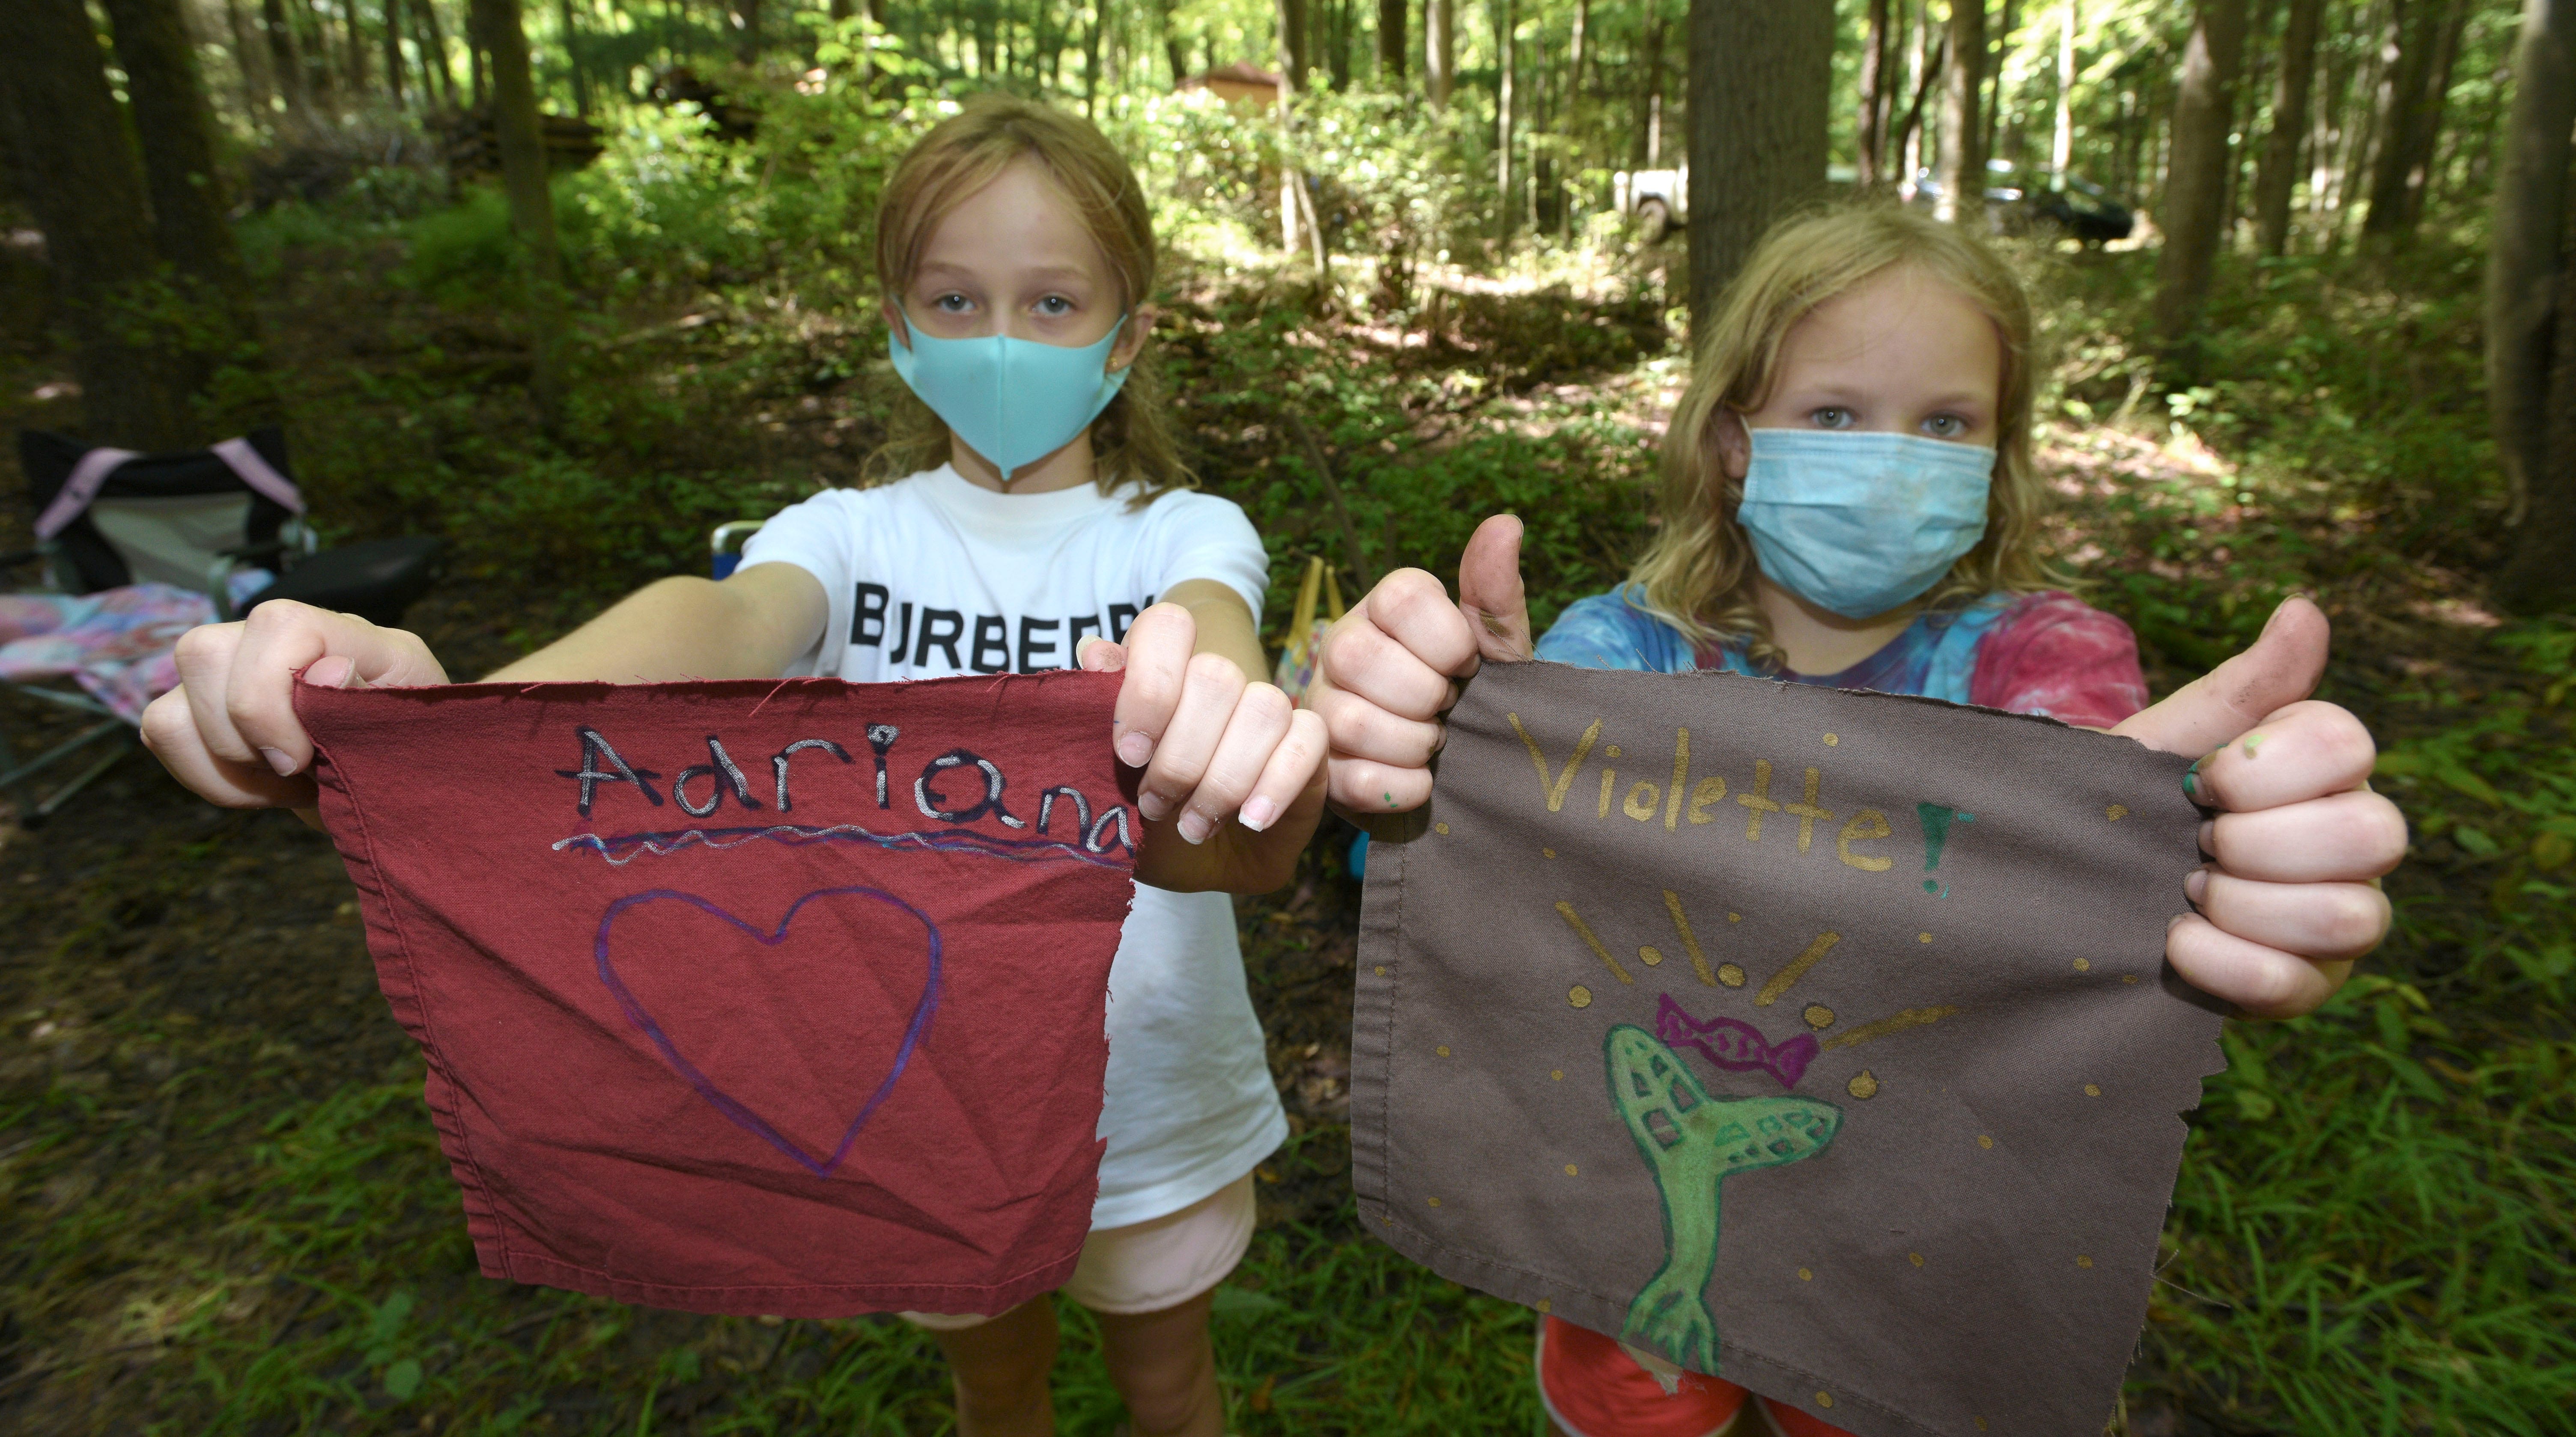 Adriana Oleksy, left, and Violette Harvat, both 10 and of Rochester, show off the flags they made with their names and something that represents them in The Holler, an outdoor classroom. Adriana's flag has a heart showing how much she loves to draw hearts and Violette's flag shows a green tree sapling and red piece of candy showing how much she loves to climb trees and eat candy.